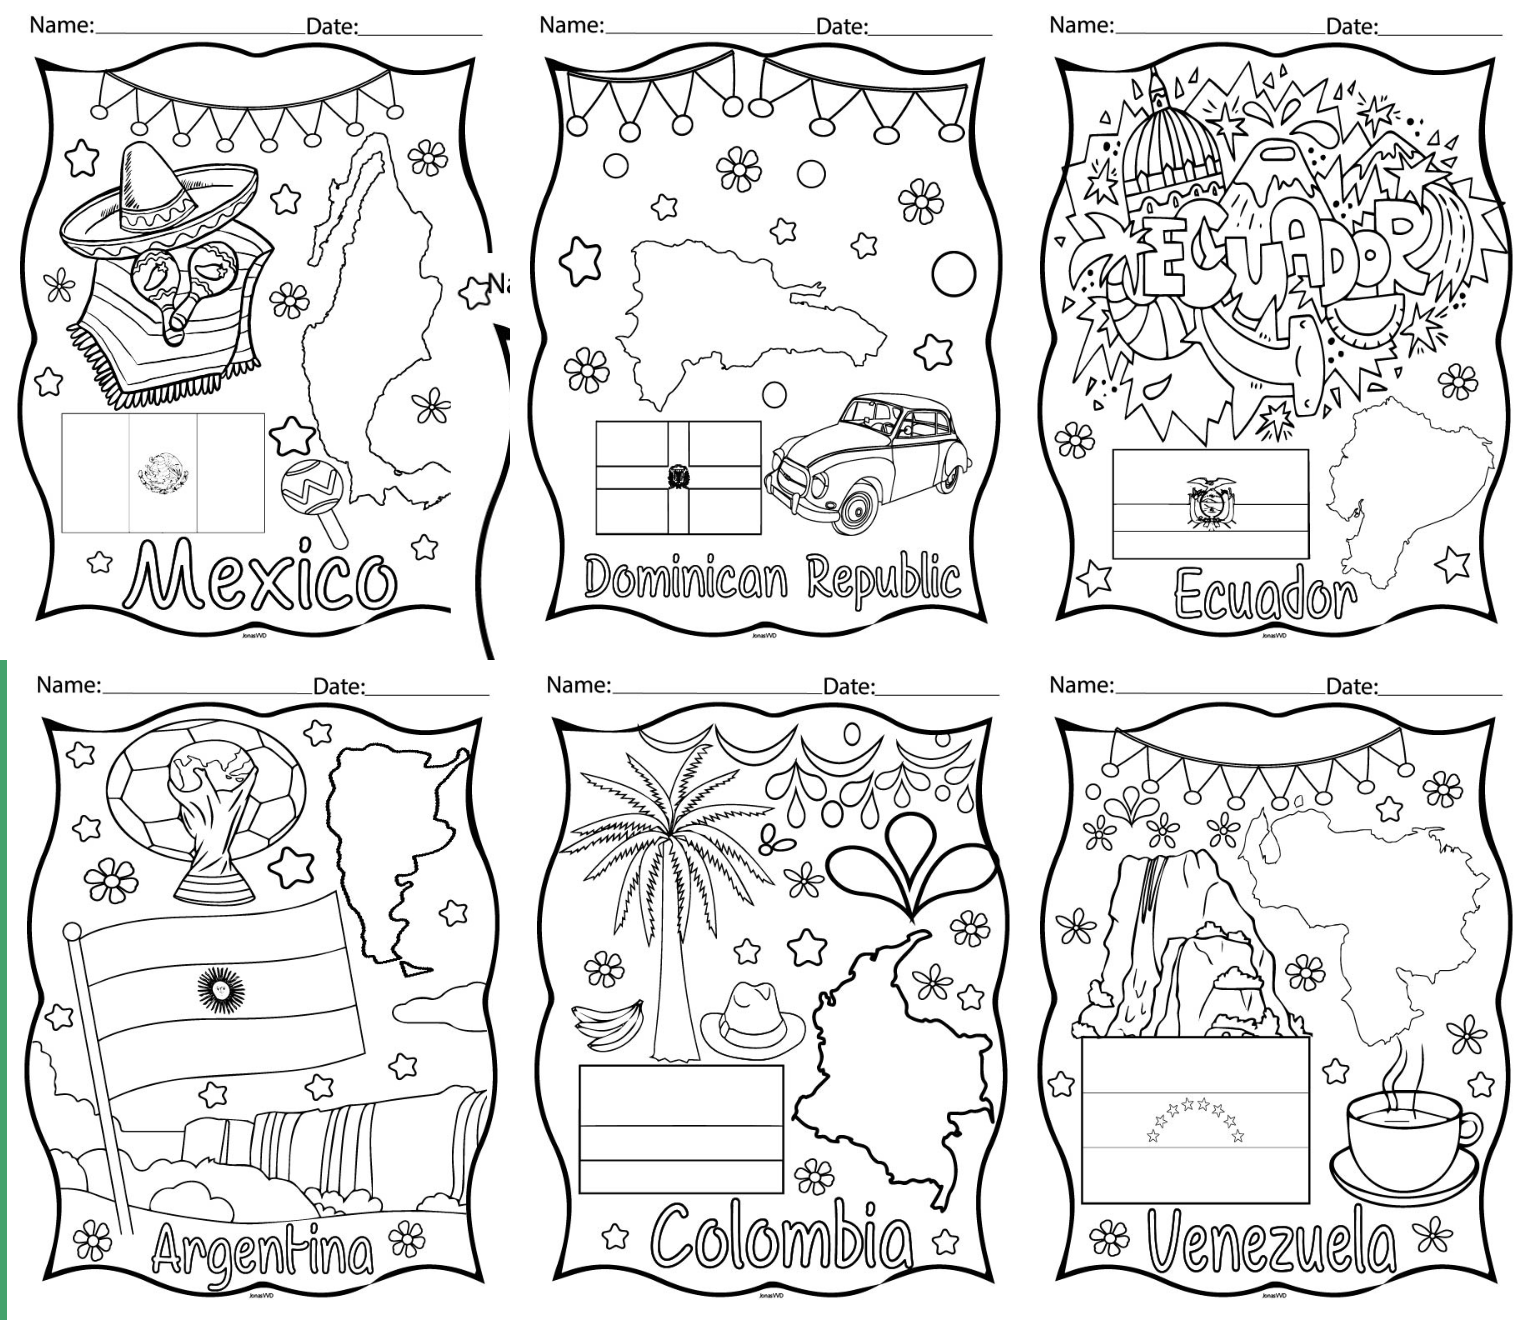 Exploring hispanic heritage vibrant coloring pages from around the world made by teachers